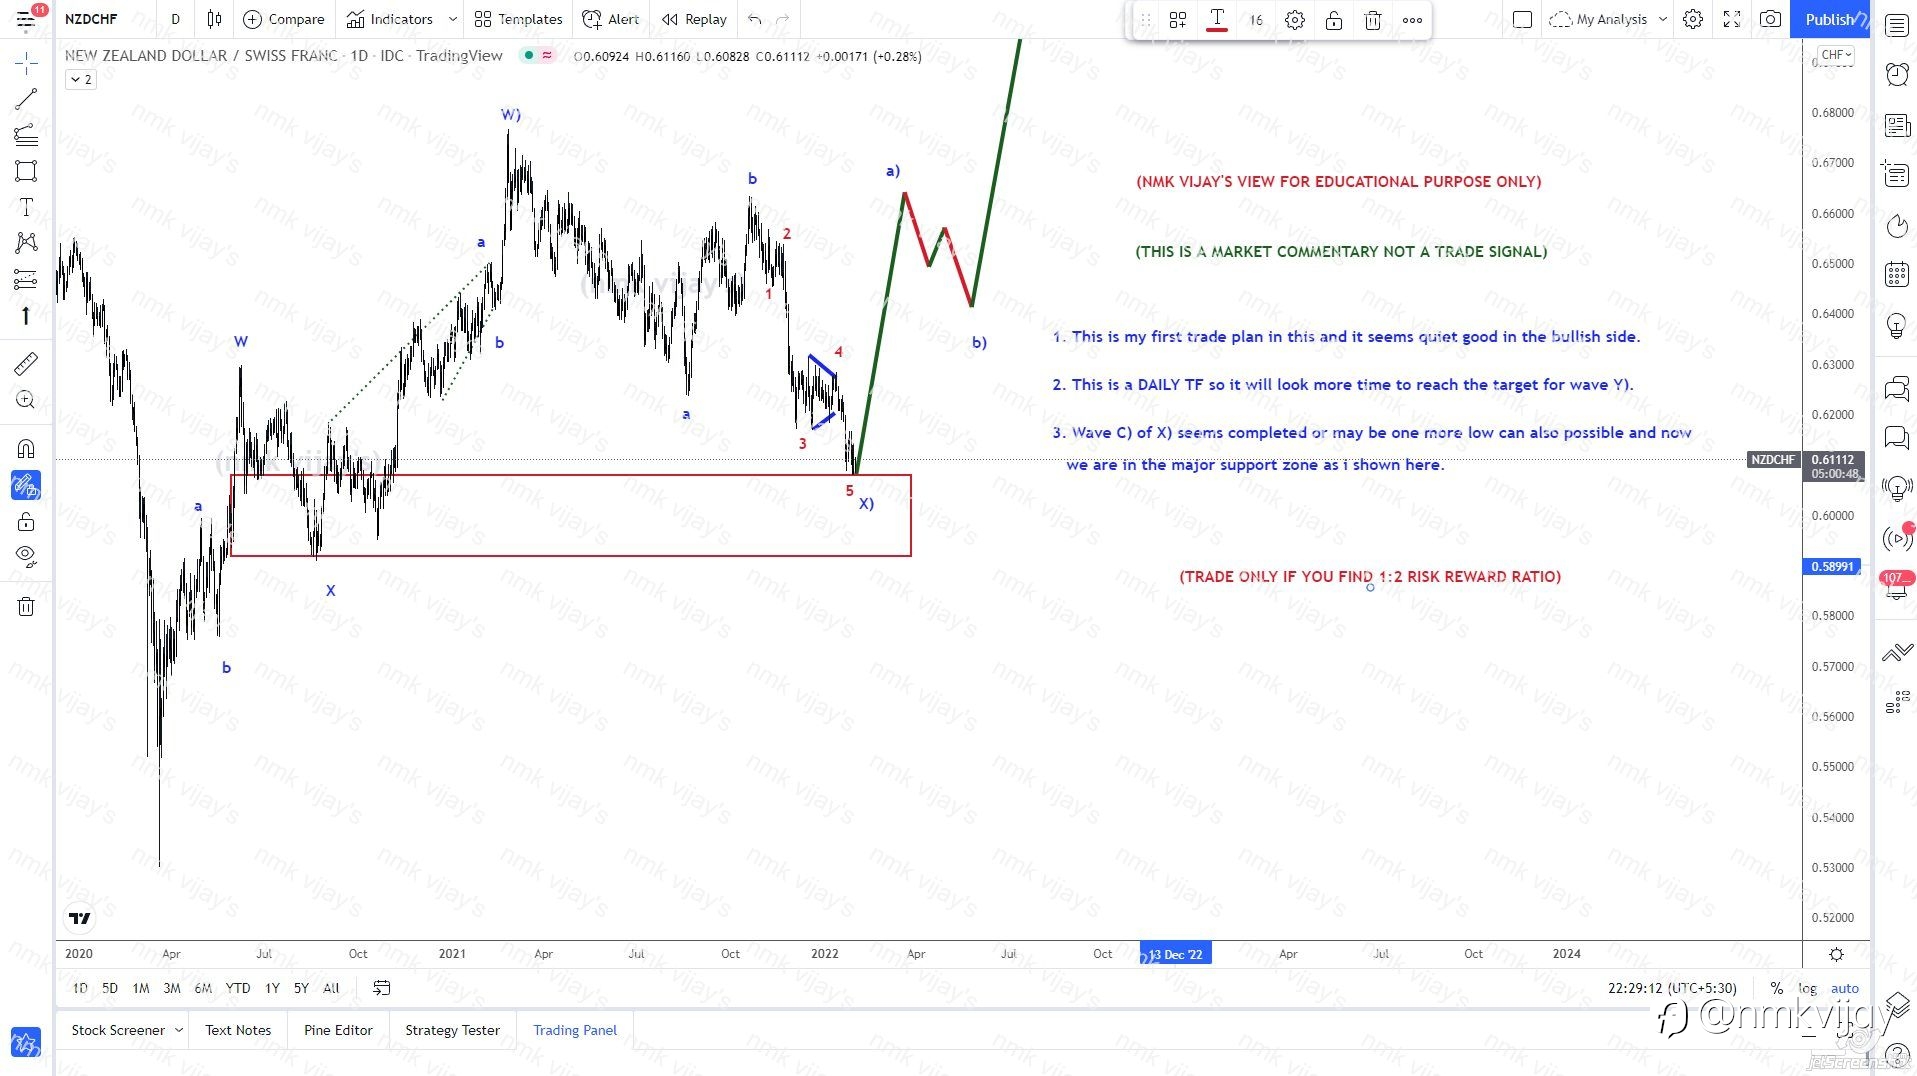 NZDCHF-Seems wave X) got completed and may bounce for Y)